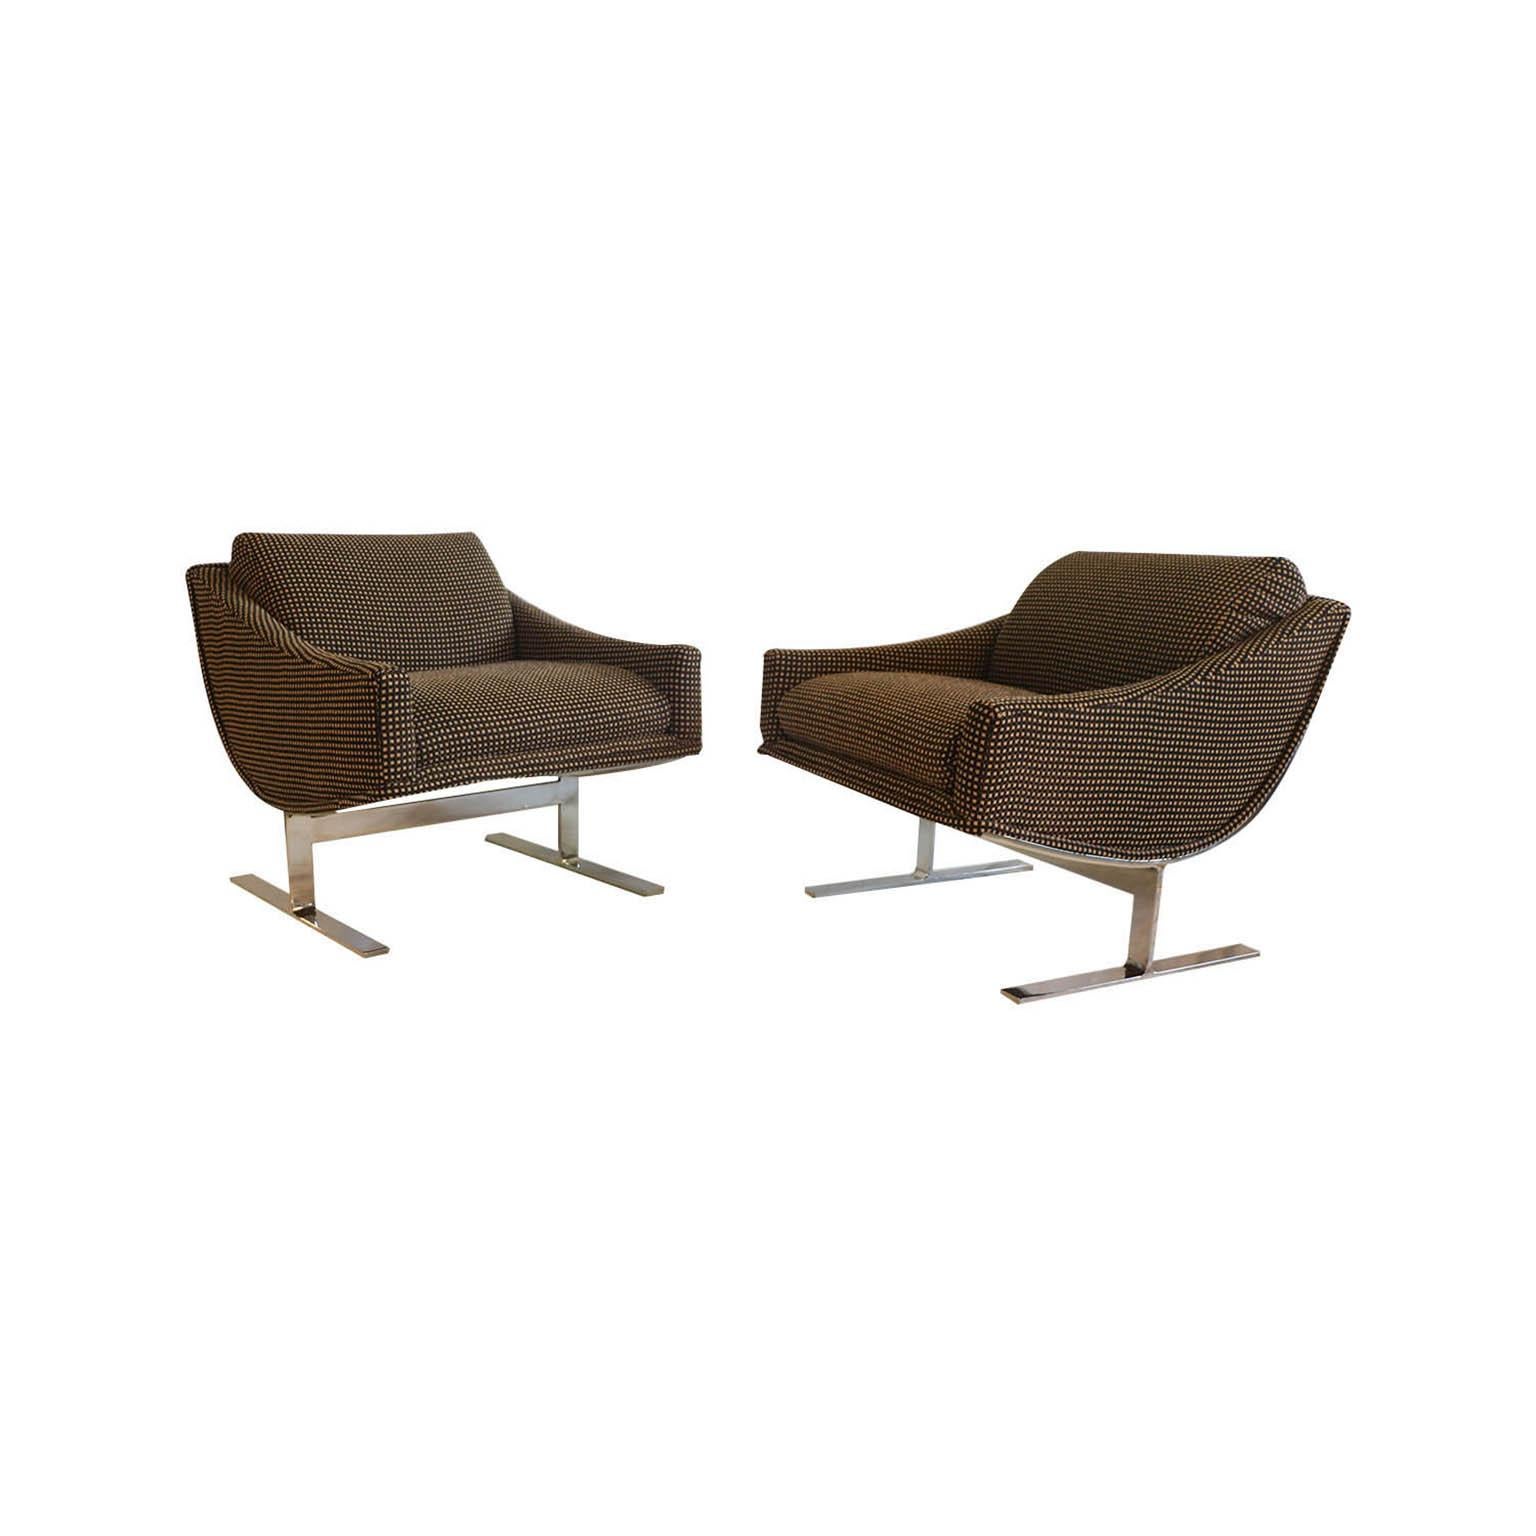 A stunning pair of Mid-Century Modern 1960s “Arc” lounge chairs designed by Kipp Stewart for Directional furniture. An exceptional pair, both for their form and quality. The pair embodies the whimsical fervor of the period, from 1960s. Featuring a